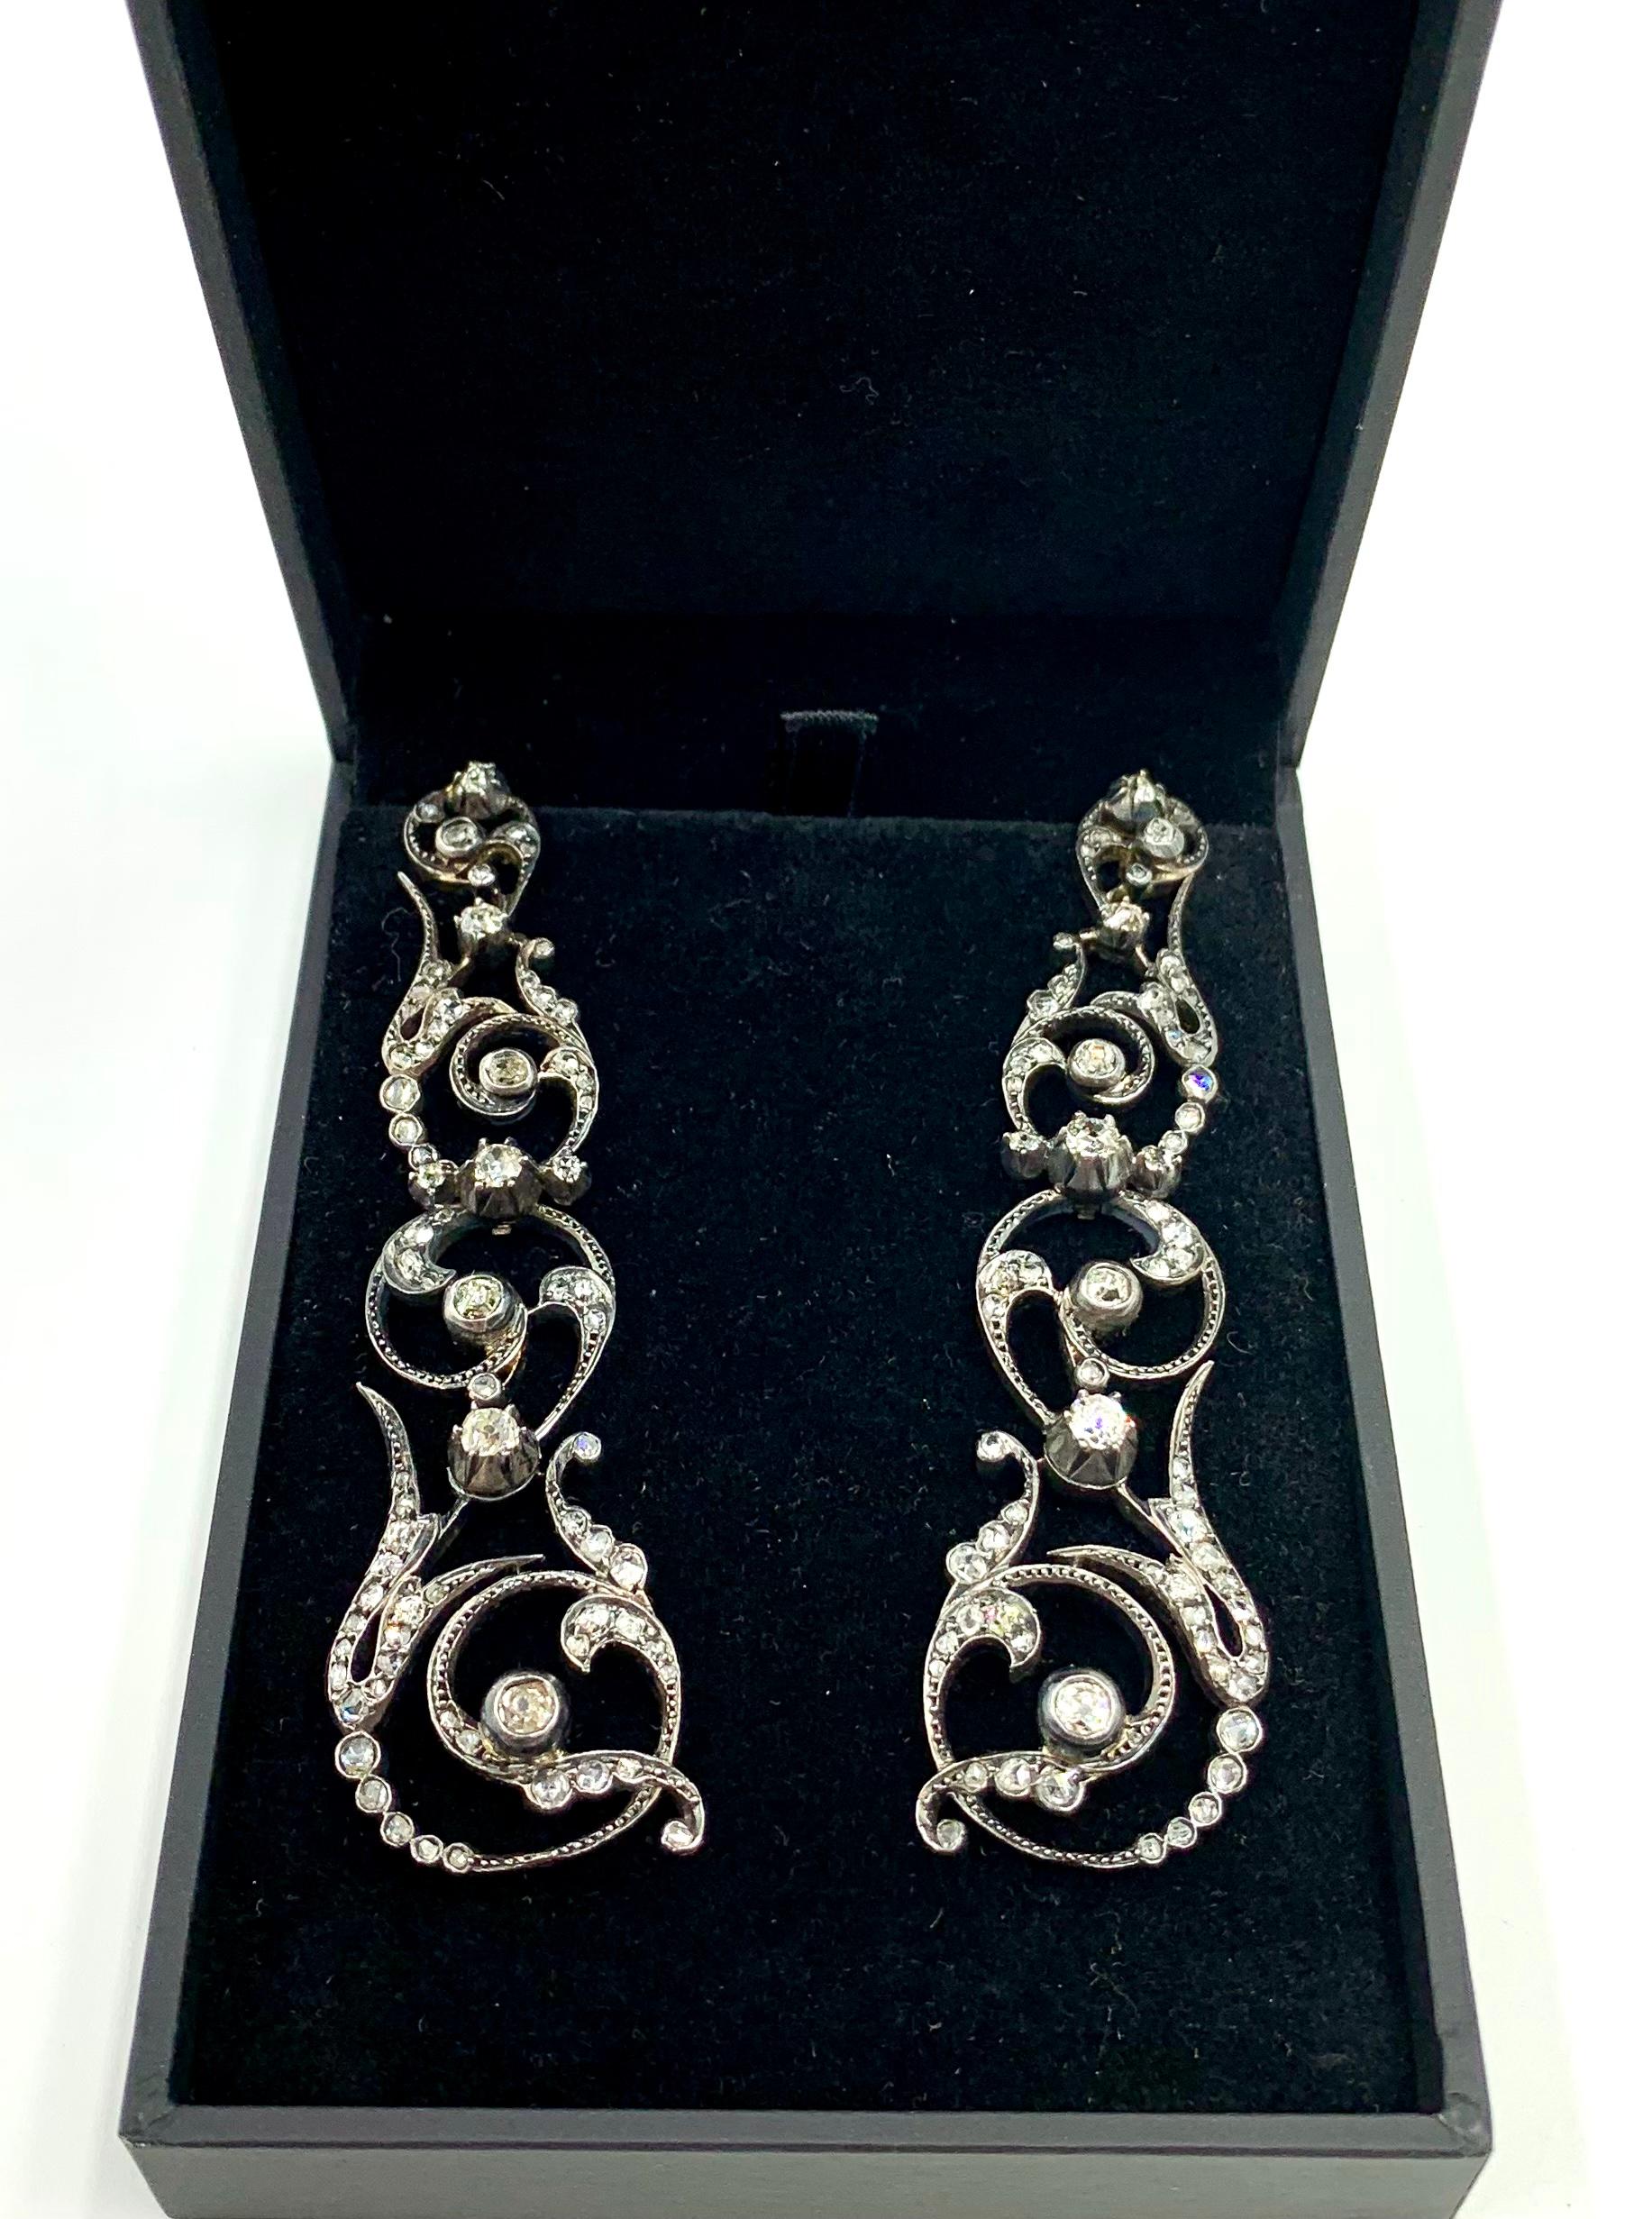 Antique Georgian 18th Century Diamond 18K Gold, Silver Topped Gold Earrings For Sale 8